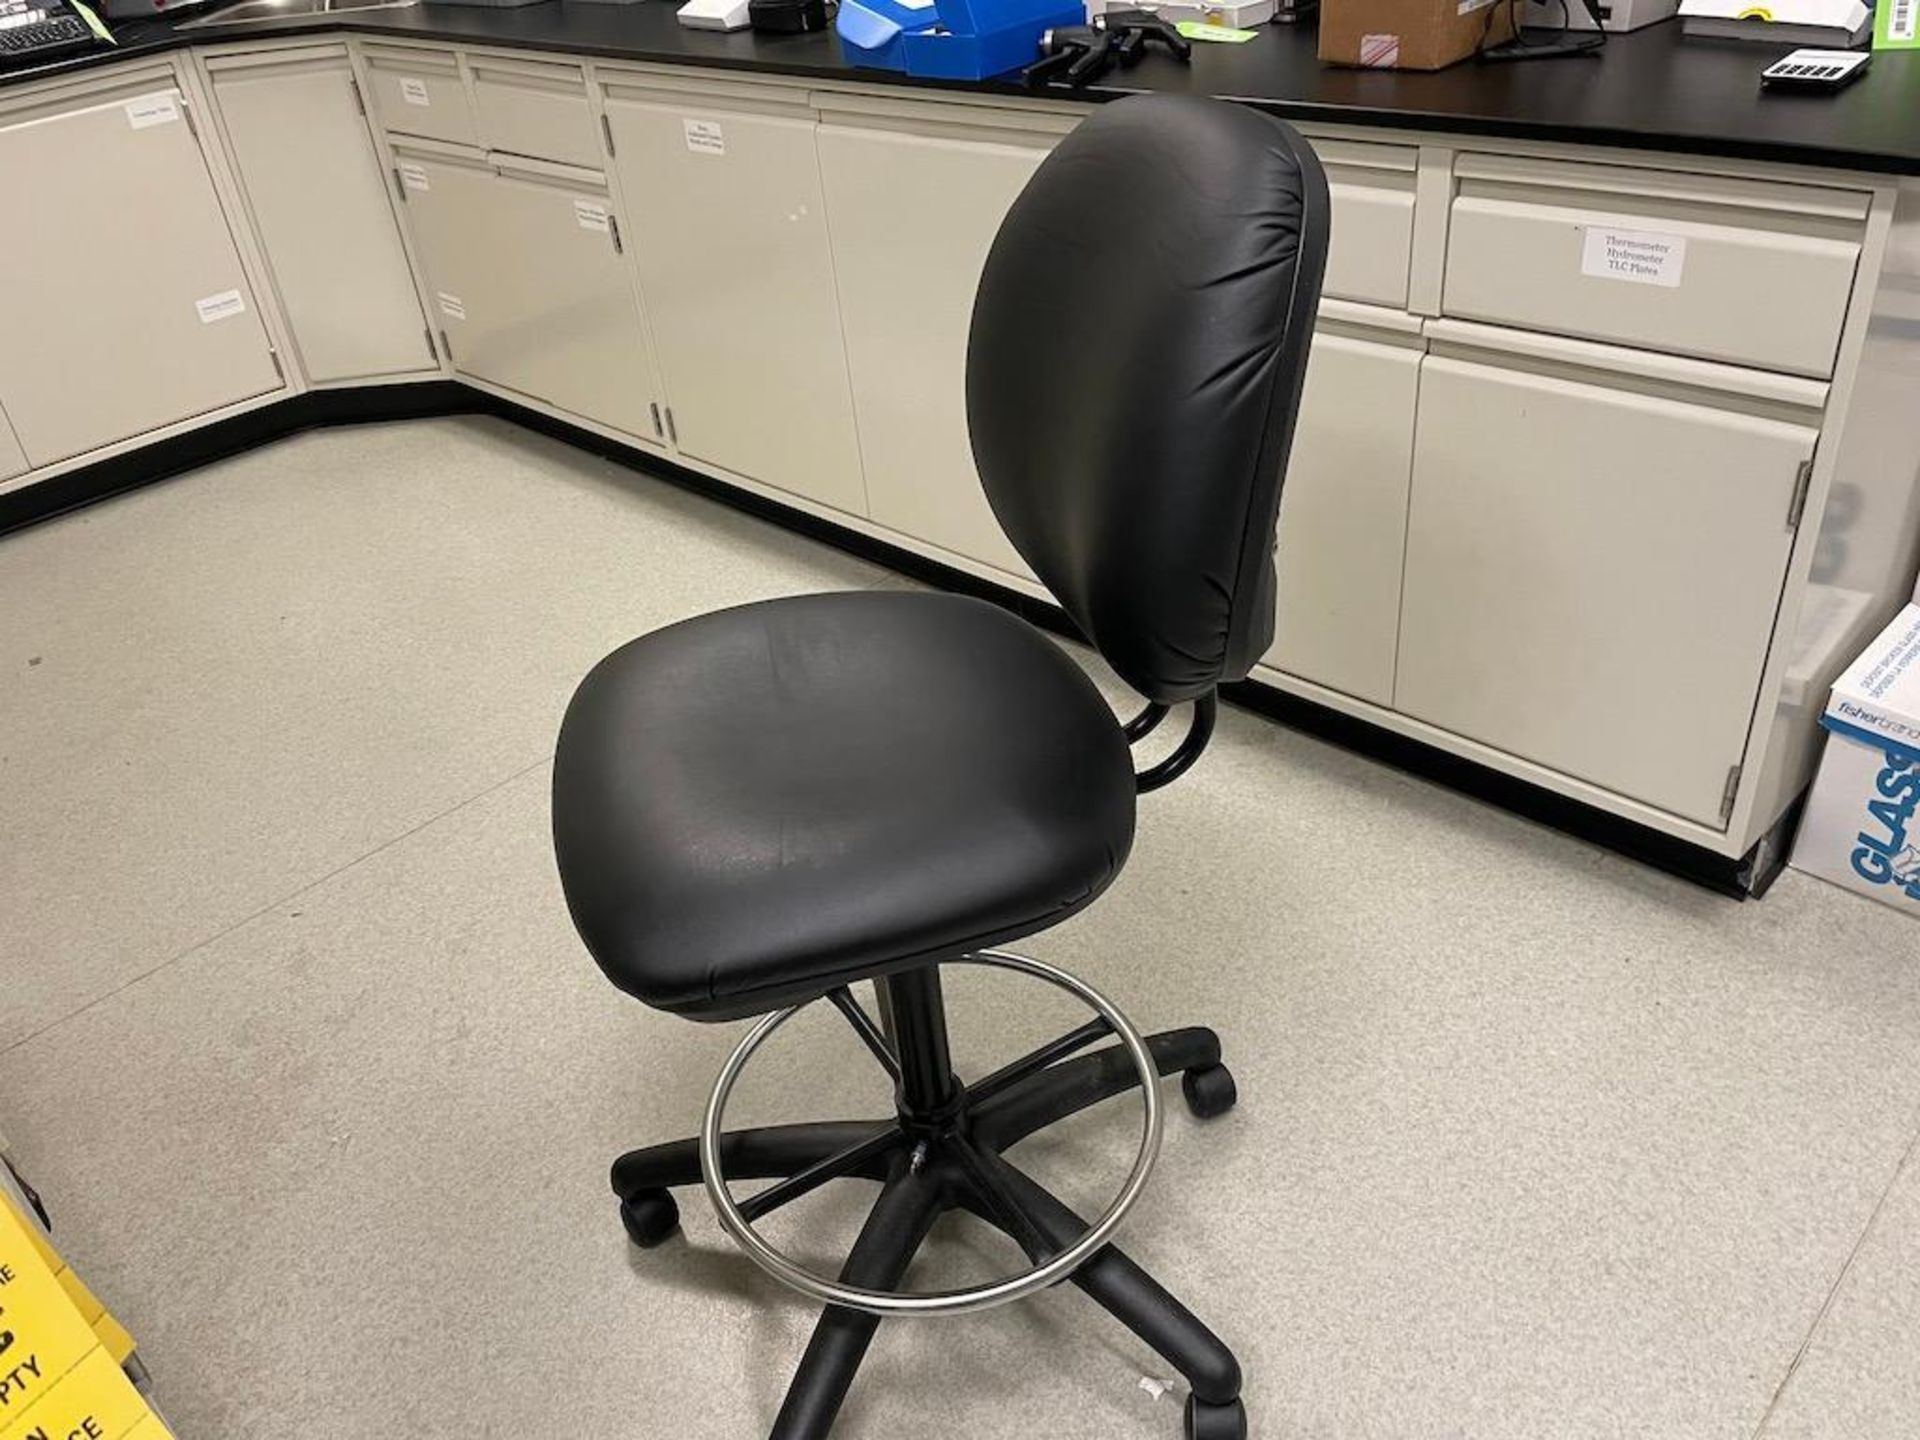 LOT 3 LAB CHAIRS AND 1 STOOL, PLUS CERAMIC ELEMENT SPACE HEATER AND FOOD SAVER BAGGING MACHINE